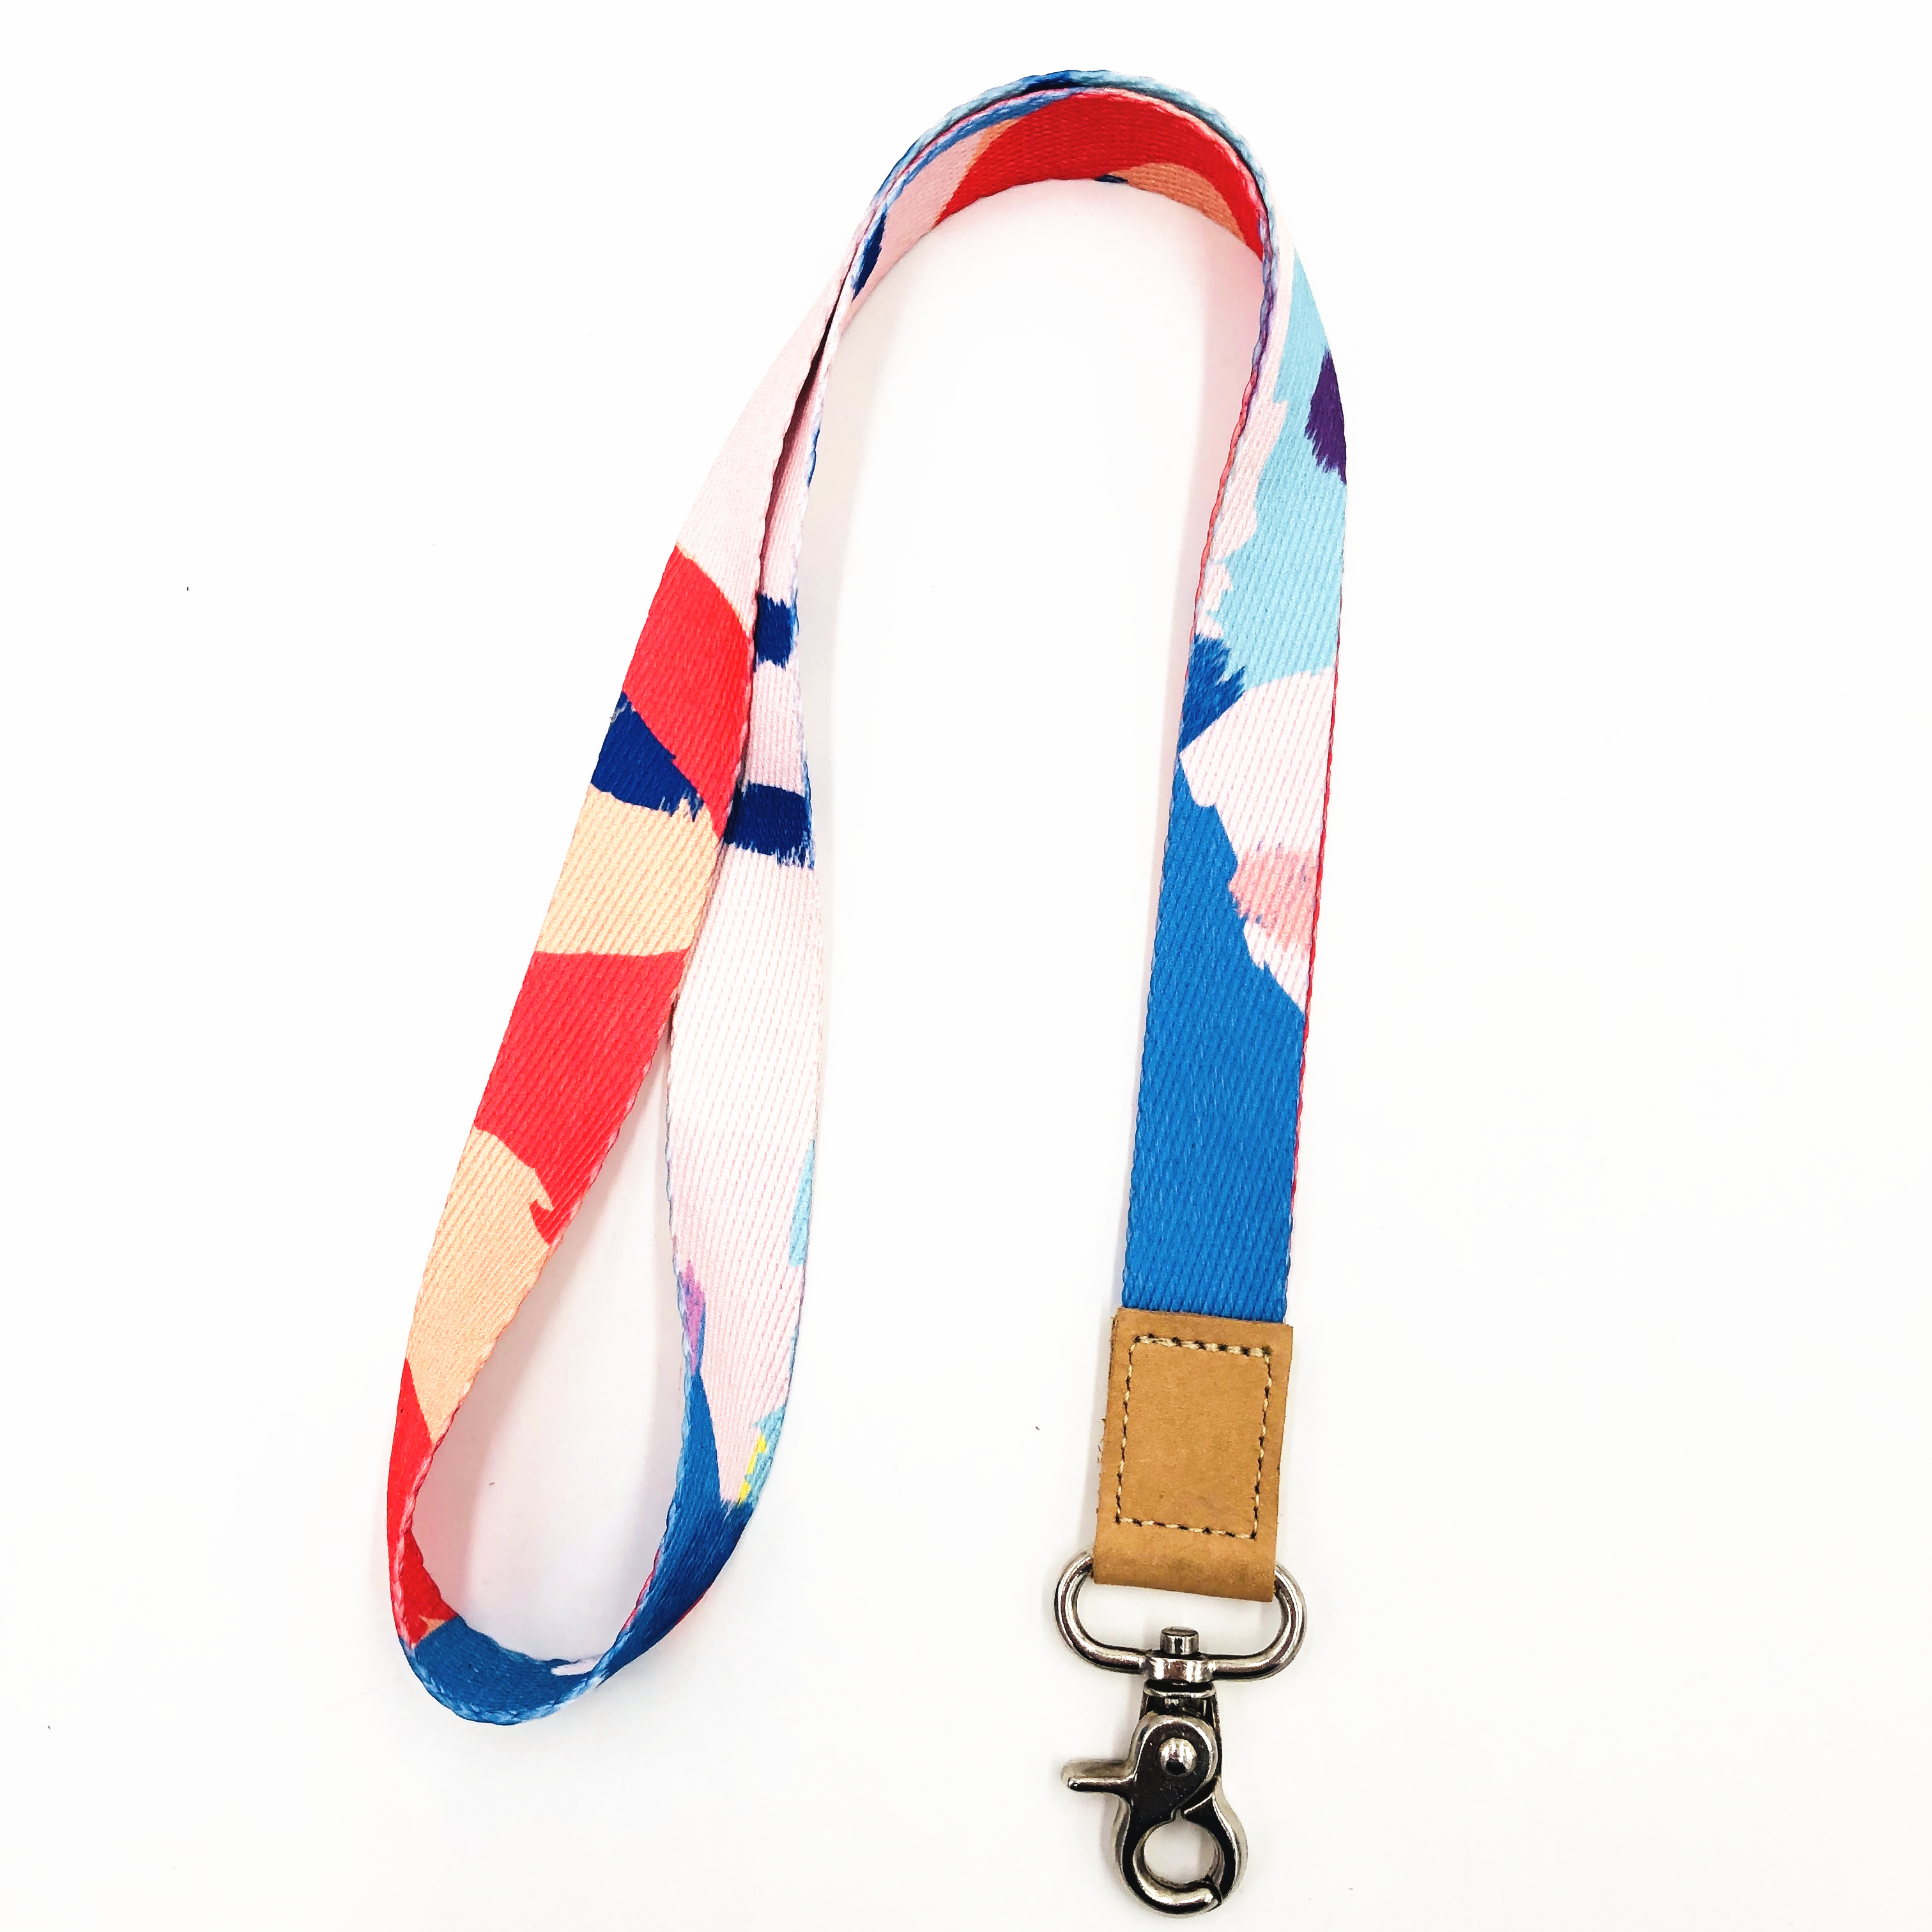 Professional China Lanyard Keychain For Printing - Cool Neck Strap KeyChain Holder Lanyard for Key – Bison